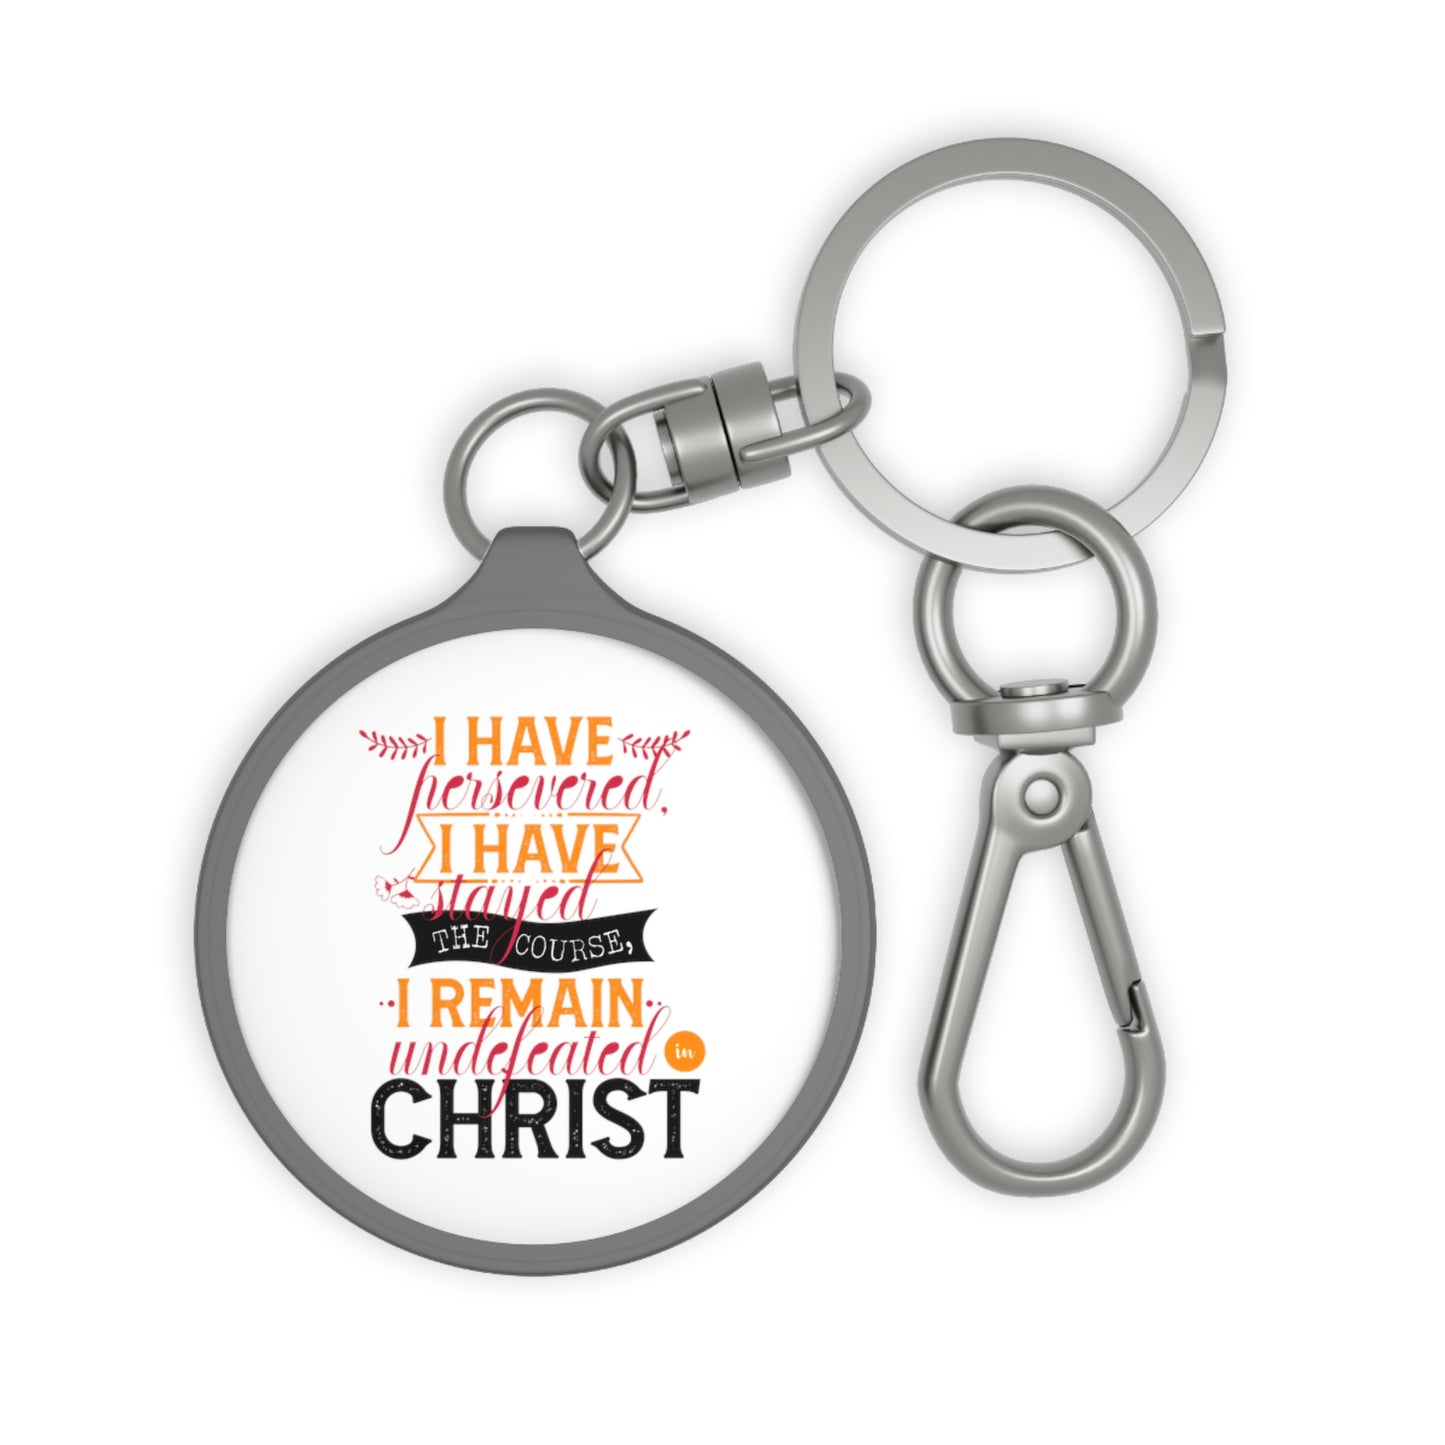 I Have Persevered I Have Stayed The Course I Remain Undefeated In Christ Key Fob